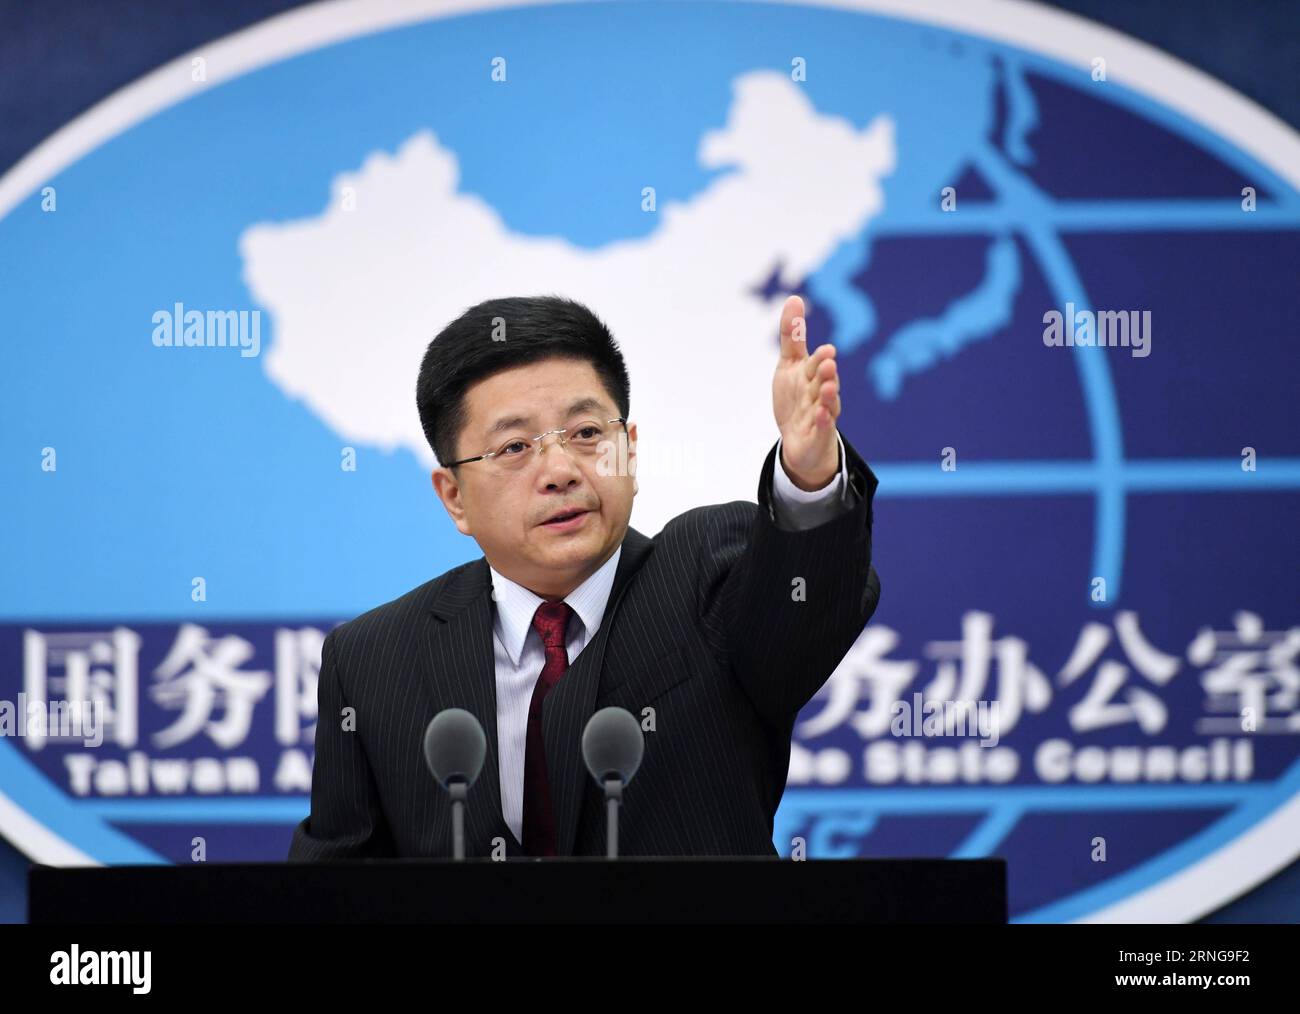 (160914) -- BEIJING, Sept. 14, 2016 -- Ma Xiaoguang, spokesperson for the Taiwan Affairs Office of the State Council, gestures at a regular press conference in Beijing, capital of China, Sept. 14, 2016. ) (wyo) CHINA-BEIJING-TAIWAN AFFAIRS-PRESS CONFERENCE (CN) ChenxYehua PUBLICATIONxNOTxINxCHN   160914 Beijing Sept 14 2016 MA Xiaoguang spokesperson for The TAIWAN Affairs Office of The State Council gestures AT a Regular Press Conference in Beijing Capital of China Sept 14 2016 wyo China Beijing TAIWAN Affairs Press Conference CN ChenxYehua PUBLICATIONxNOTxINxCHN Stock Photo